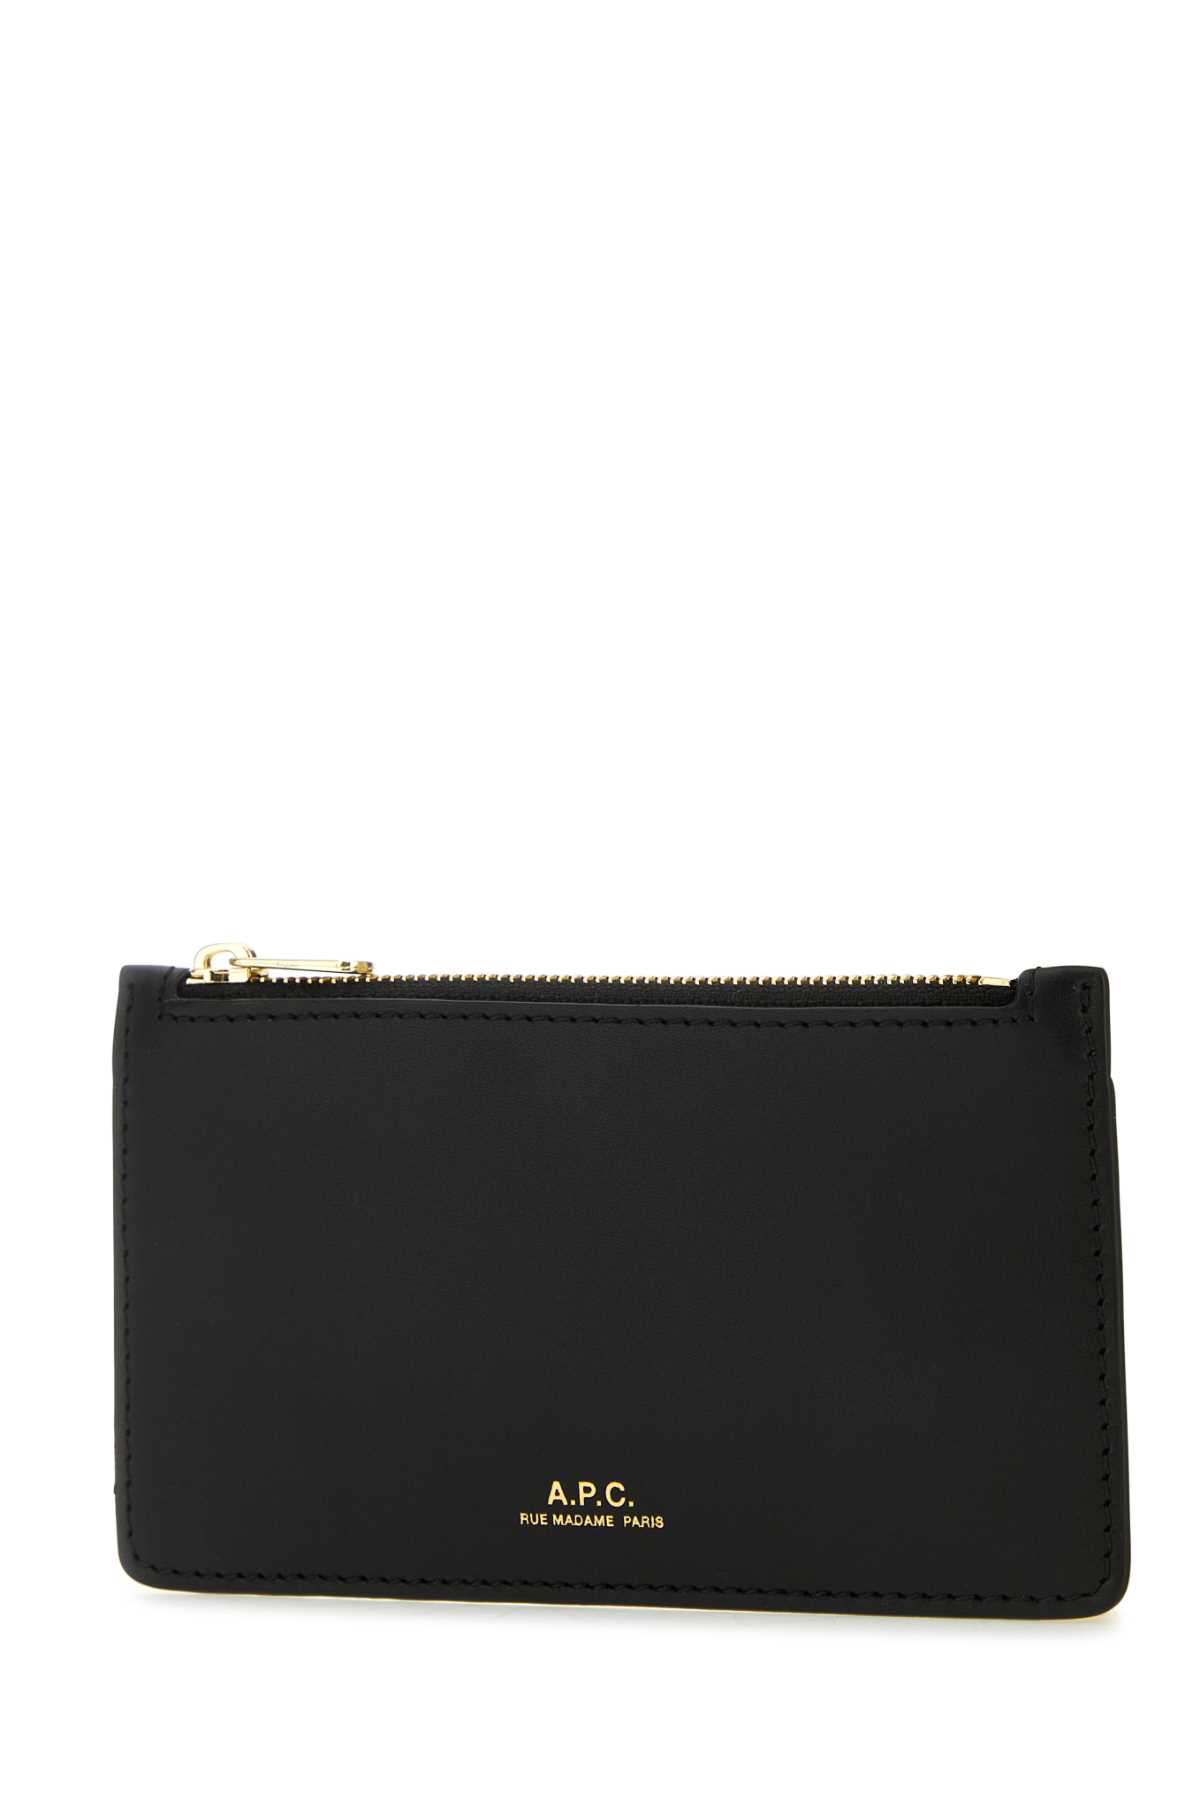 APC BLACK LEATHER WILLOW CARD HOLDER